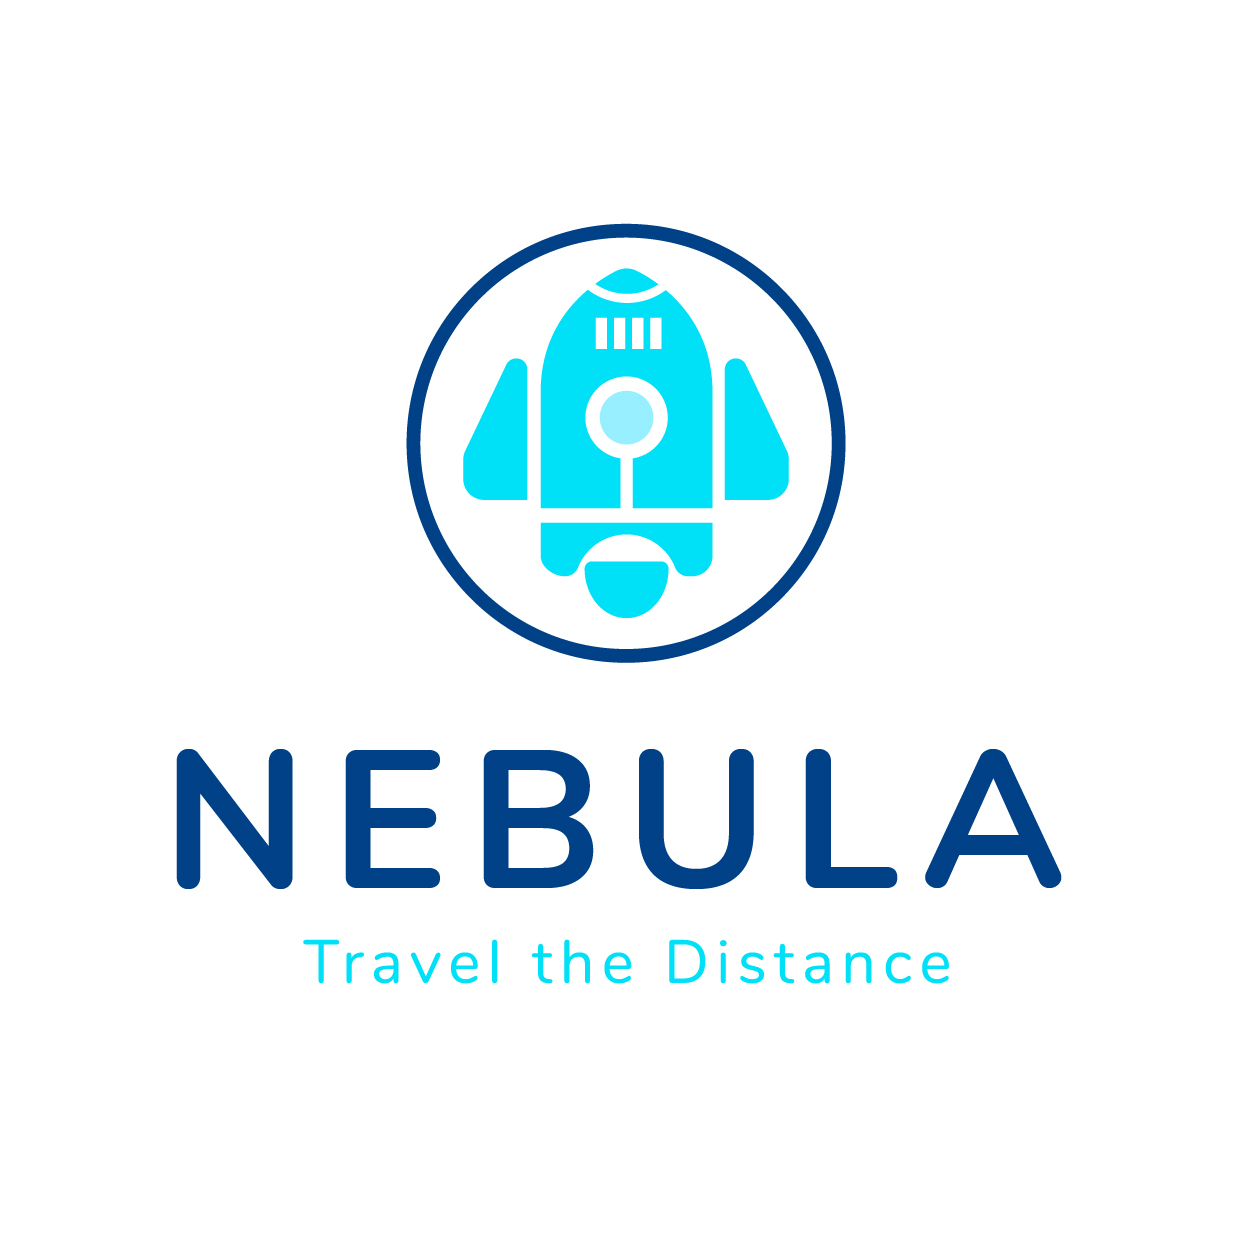 Nebula Logo Design logo design by logo designer Dandelion Studio for your inspiration and for the worlds largest logo competition